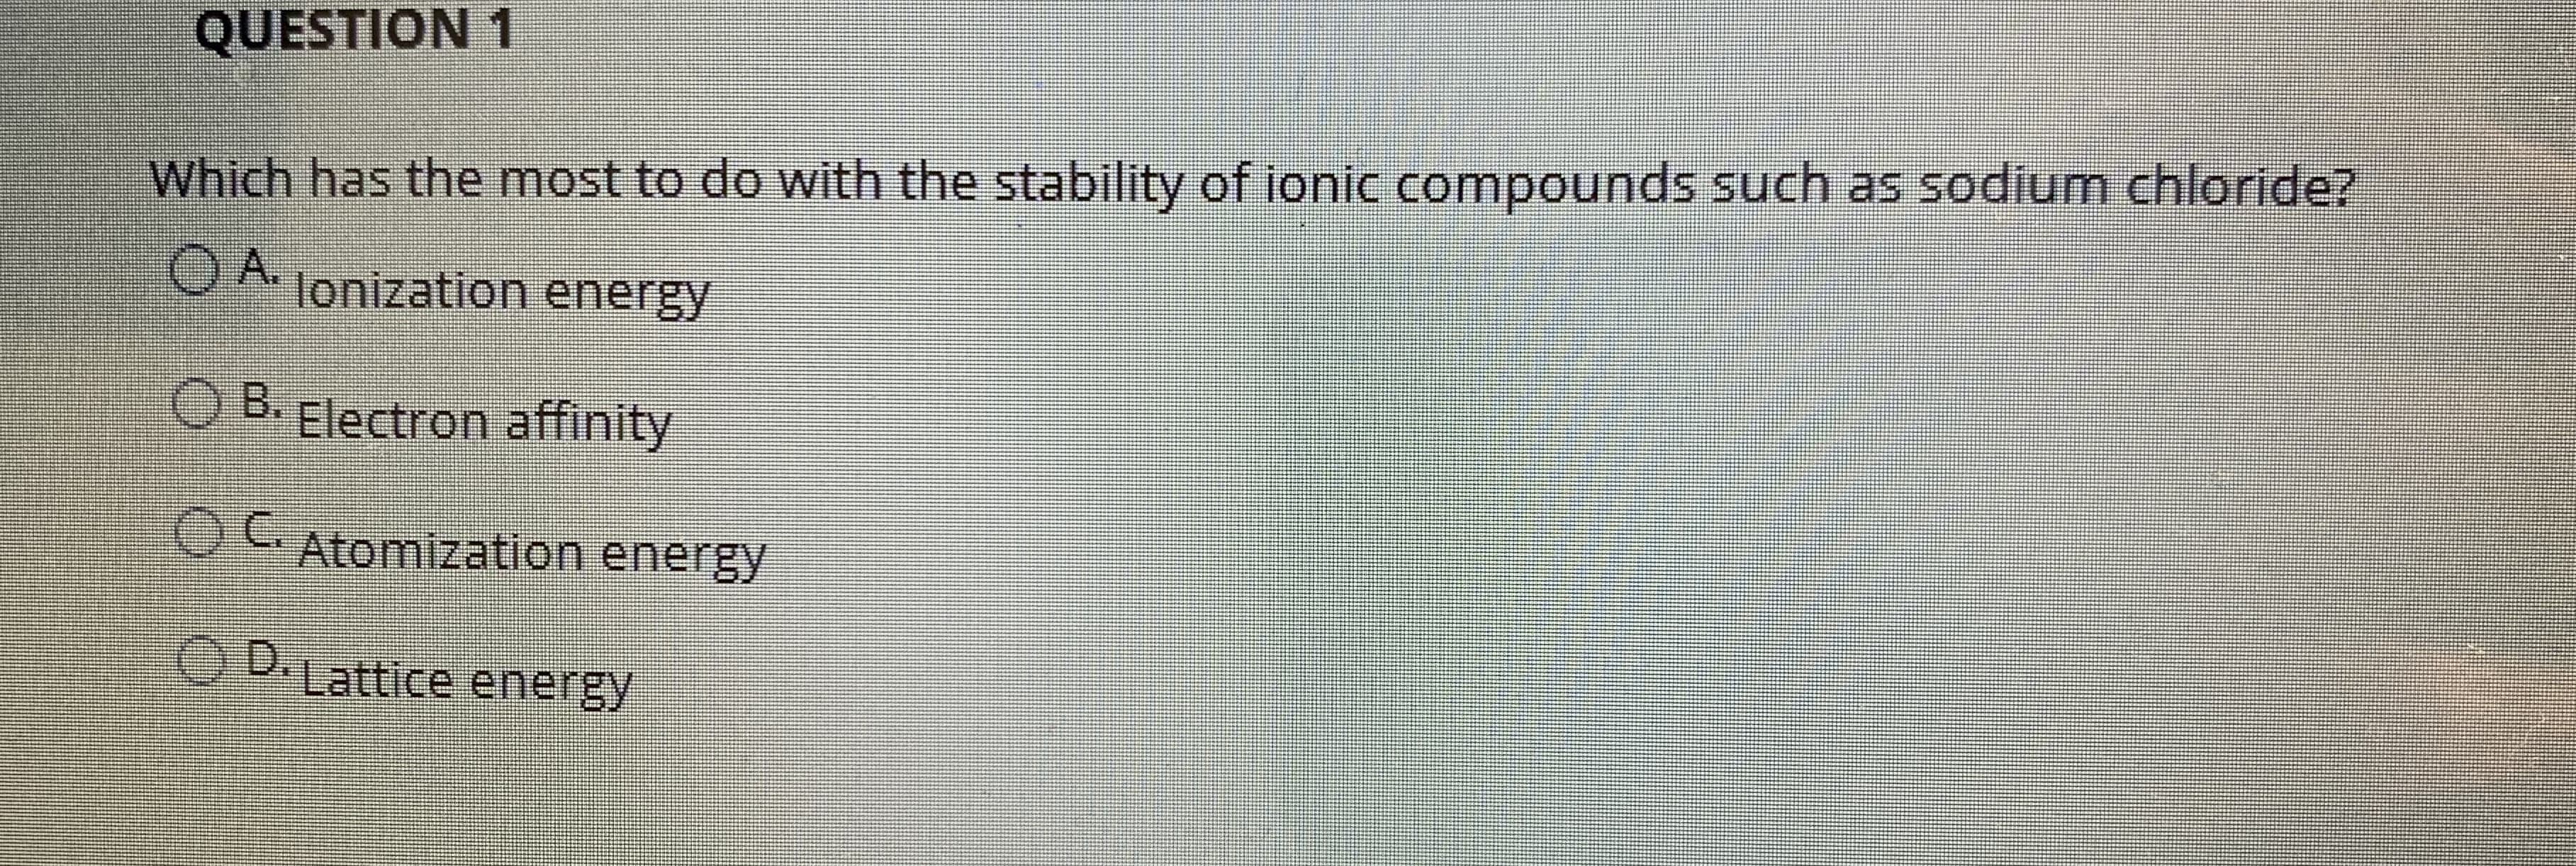 Which has the most to do with the stability of ionic compounds such as sodium chloride?
OA.
lonization energy
